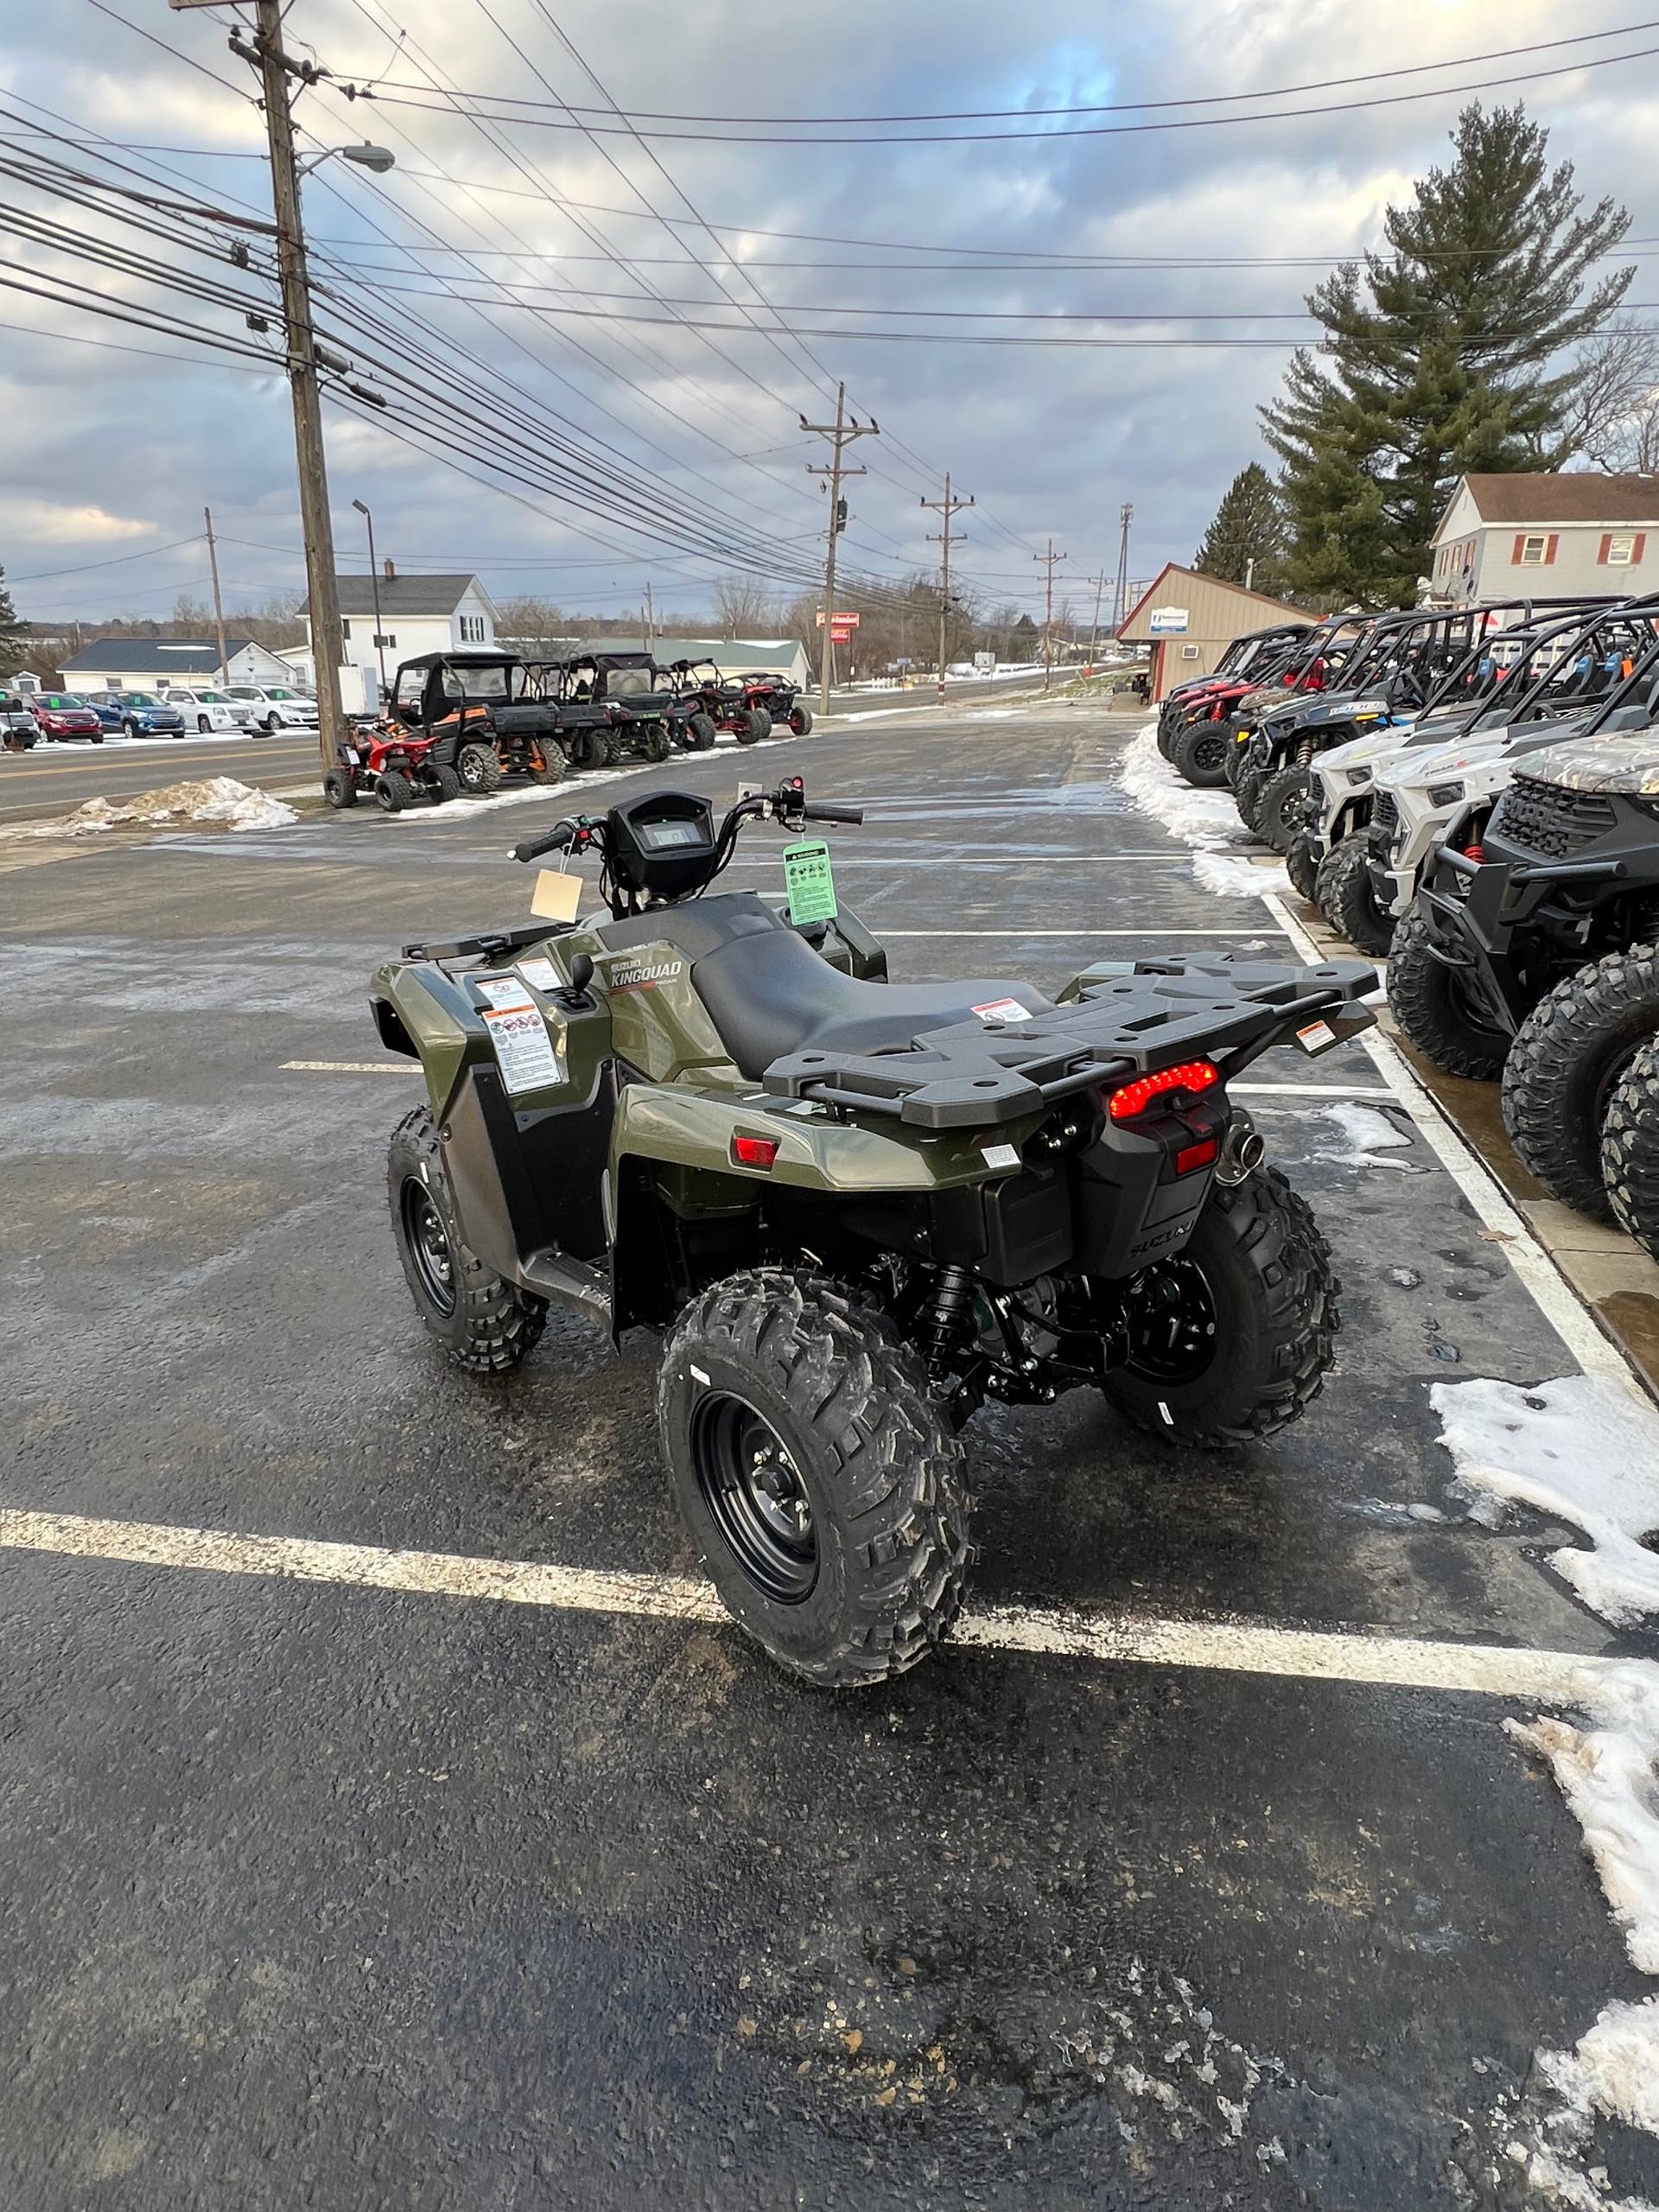 2022 Suzuki KingQuad 750 AXi at Leisure Time Powersports of Corry